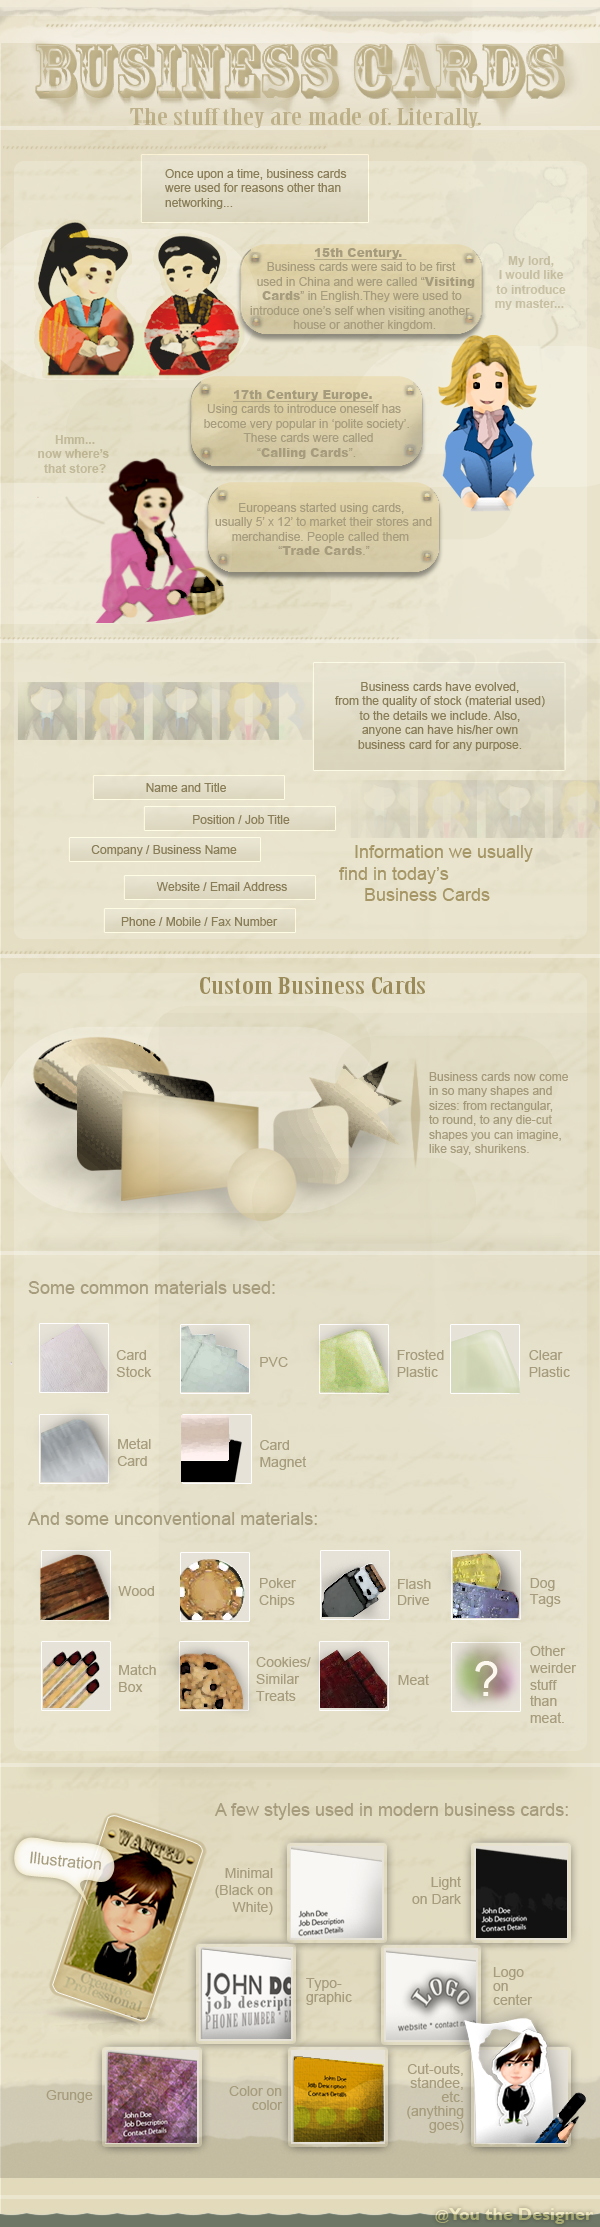 Business-Cards-infographic